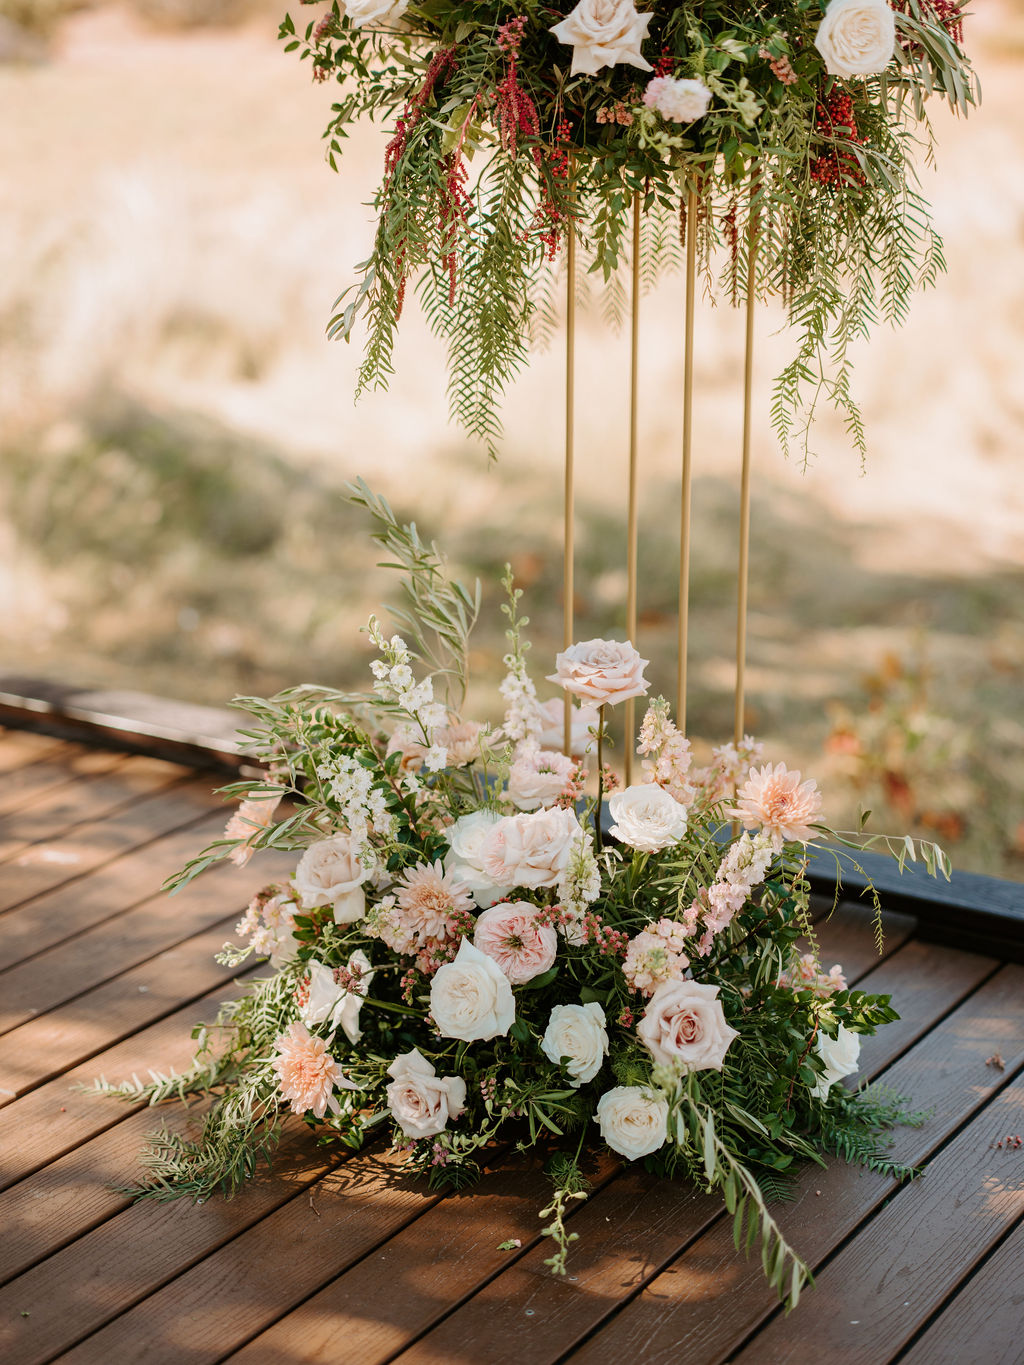 Whimsical Ceremony Decor with Harlow Stands and Soft Pink and Sage Floral for Romantic Desert & Backyard Micro-Wedding 